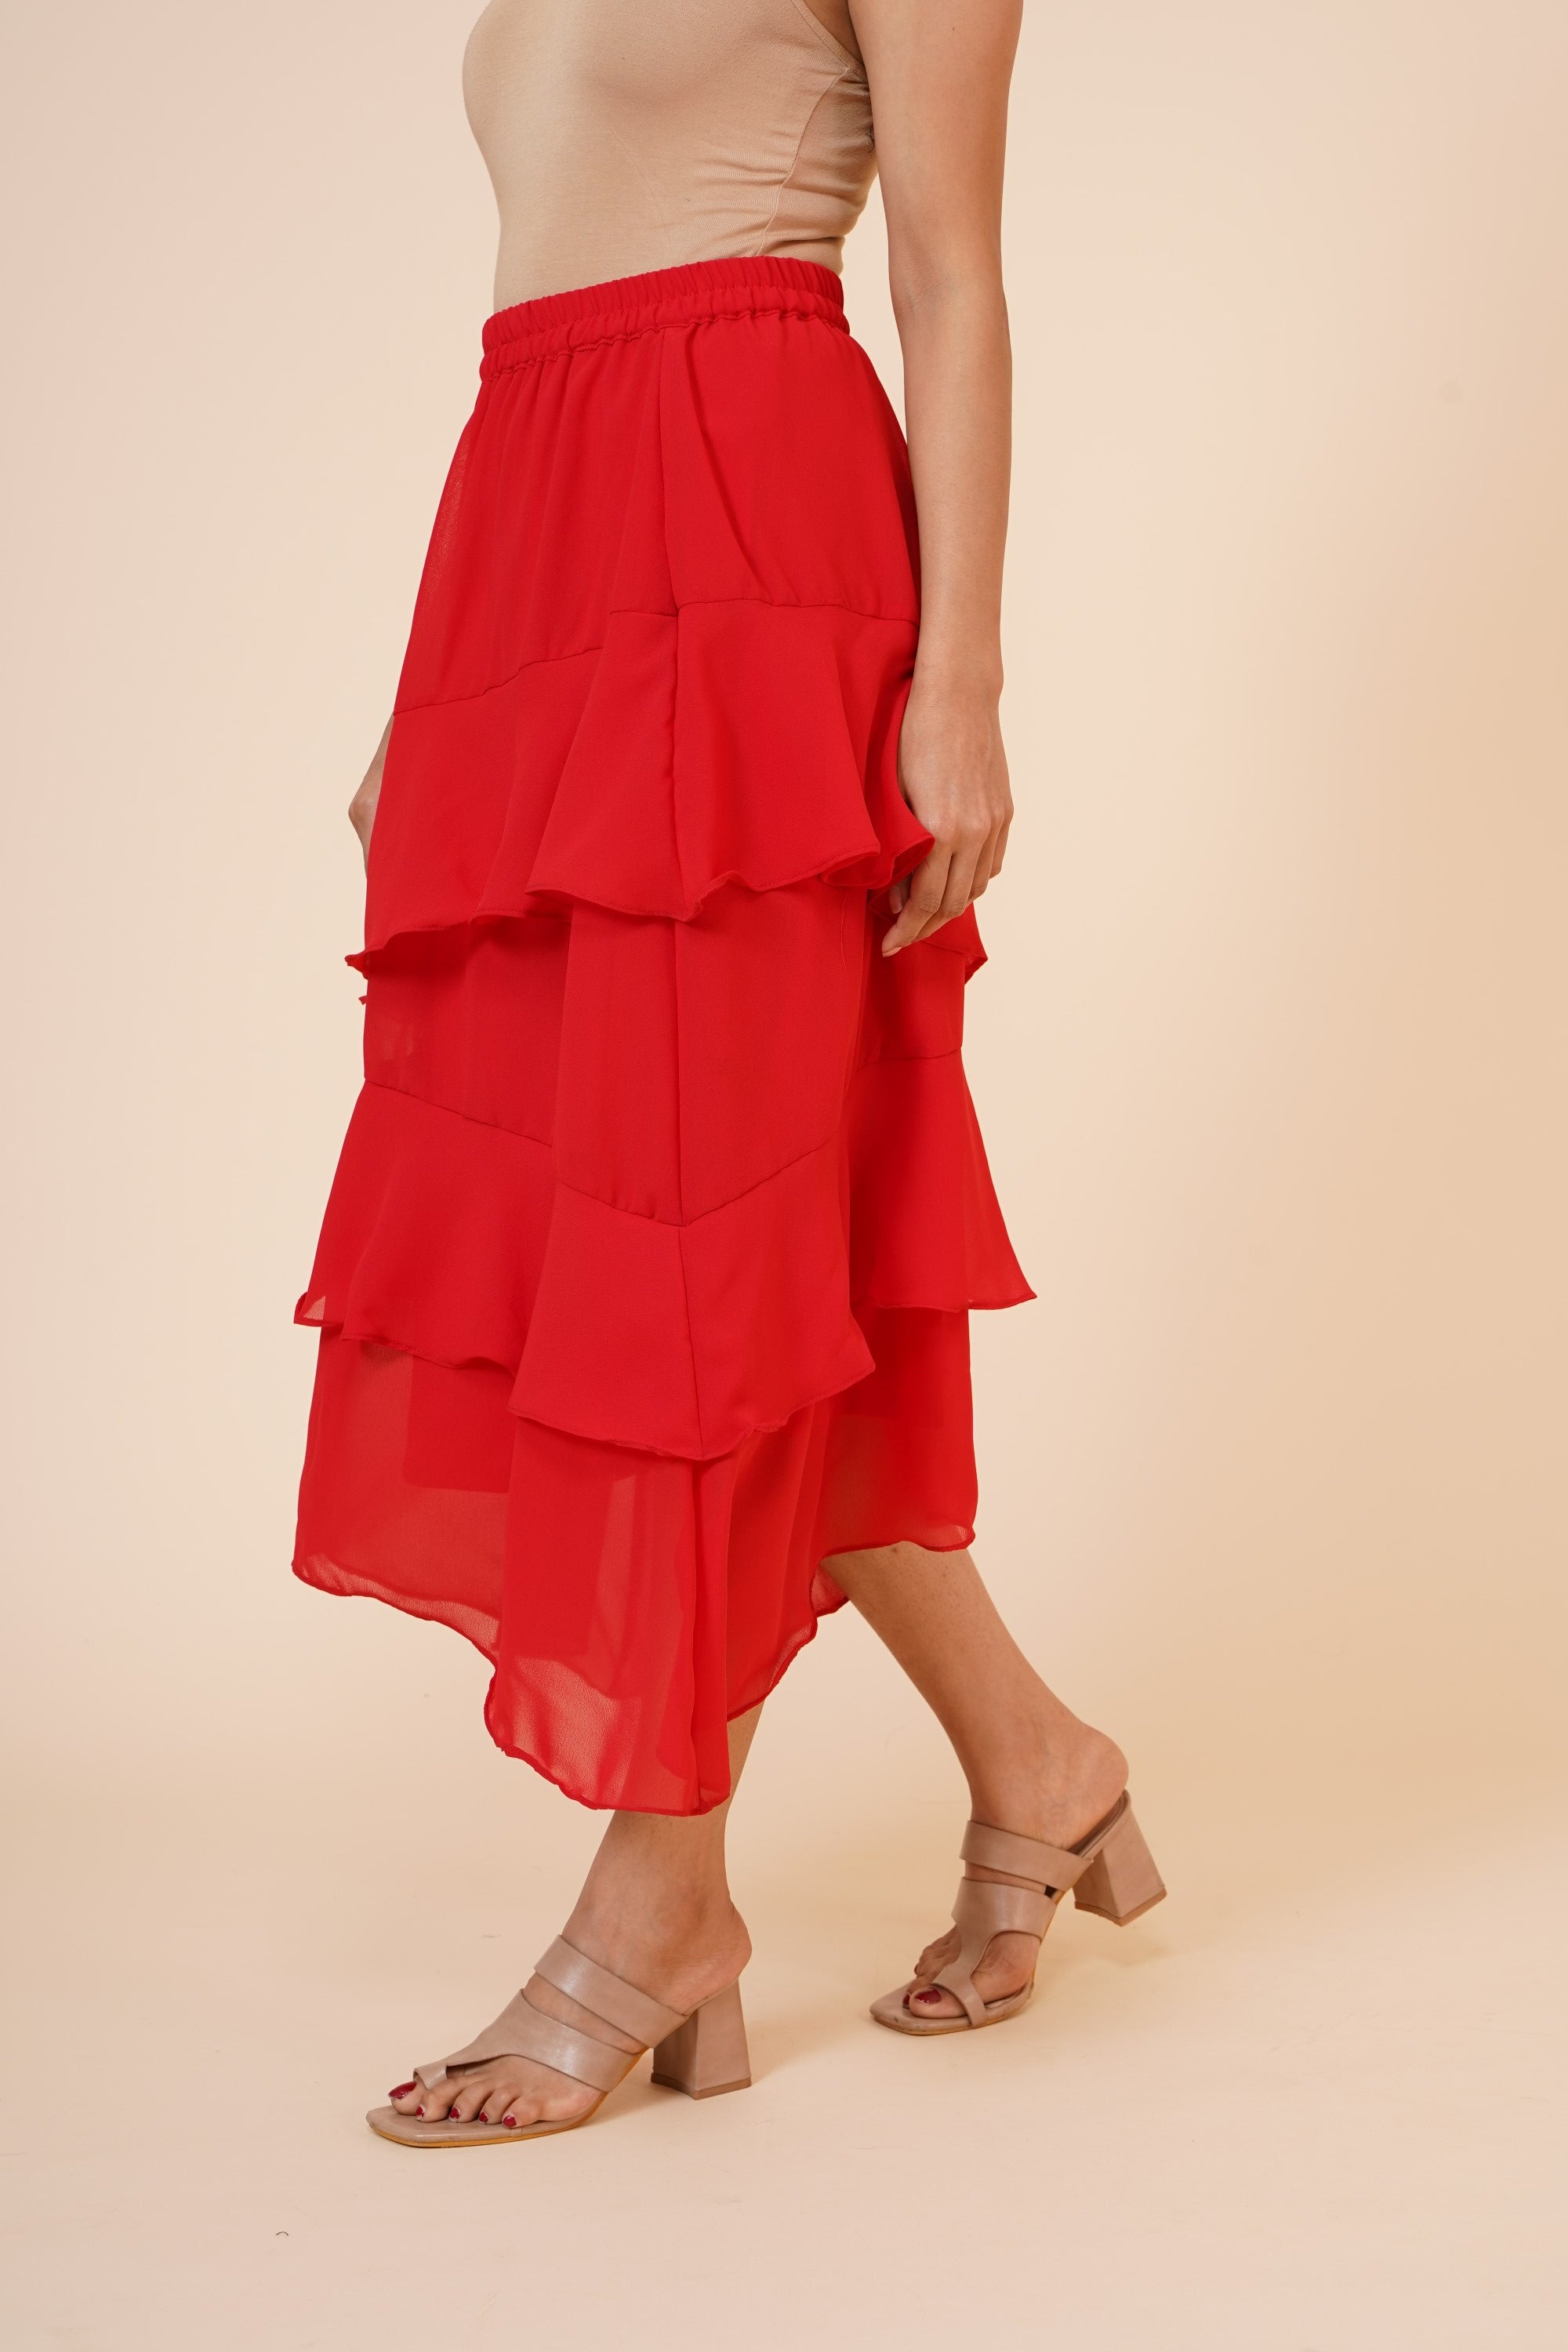 Women's Chiffon Ruffle Skirt With Elastic In Red  - MIRACOLOS by Ruchi